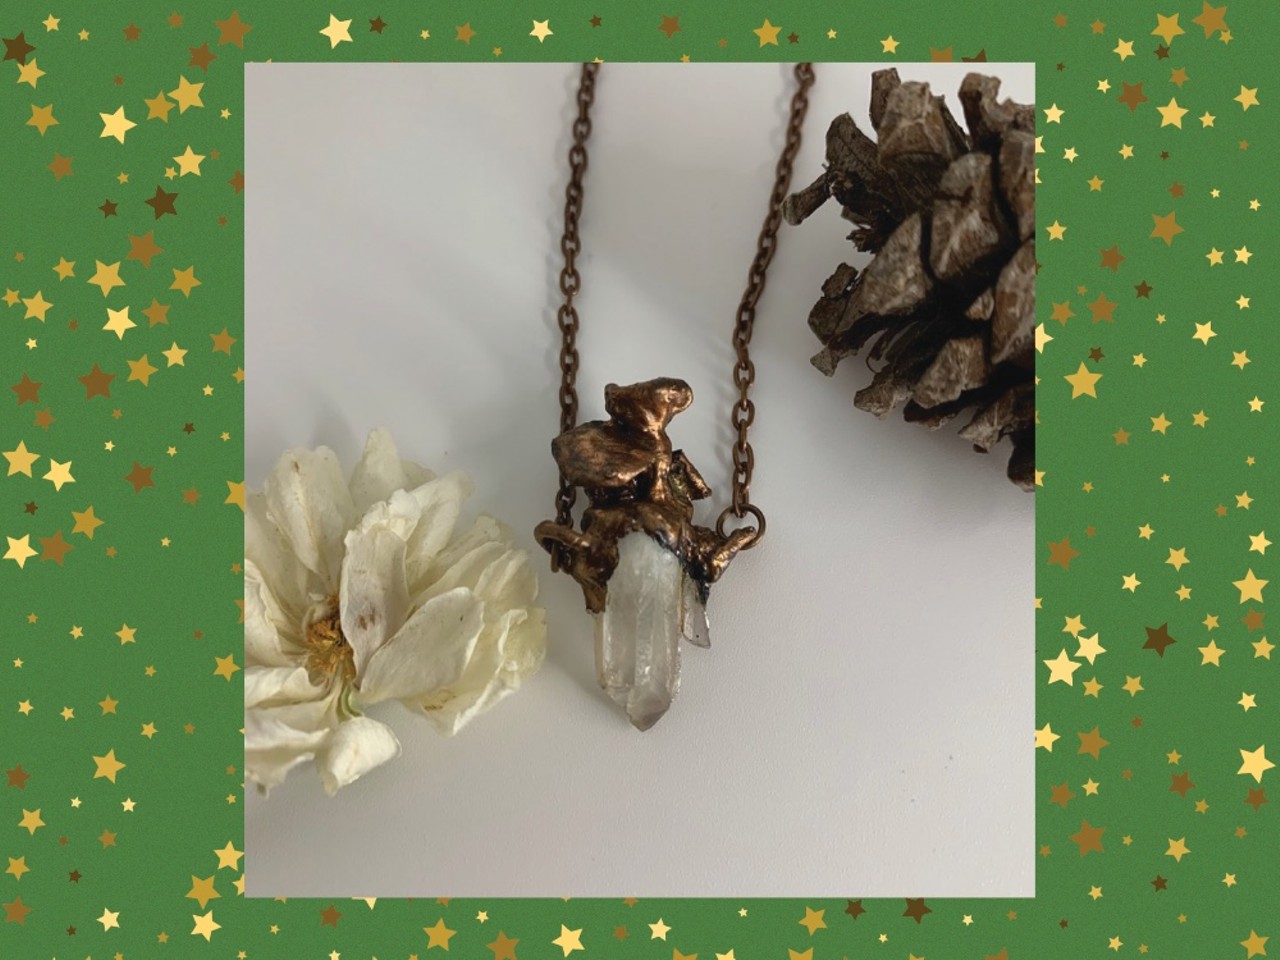 Electroformed Crystal Necklaces from Auric Visions: Ranges in price
(Auric Visions on Etsy)
Auric Visions&#146; electroformed crystal necklaces work as a statement piece to anyone&#146;s closet with a wide selection of crystals, metals, and more. 
Photo credit: Auric Visions